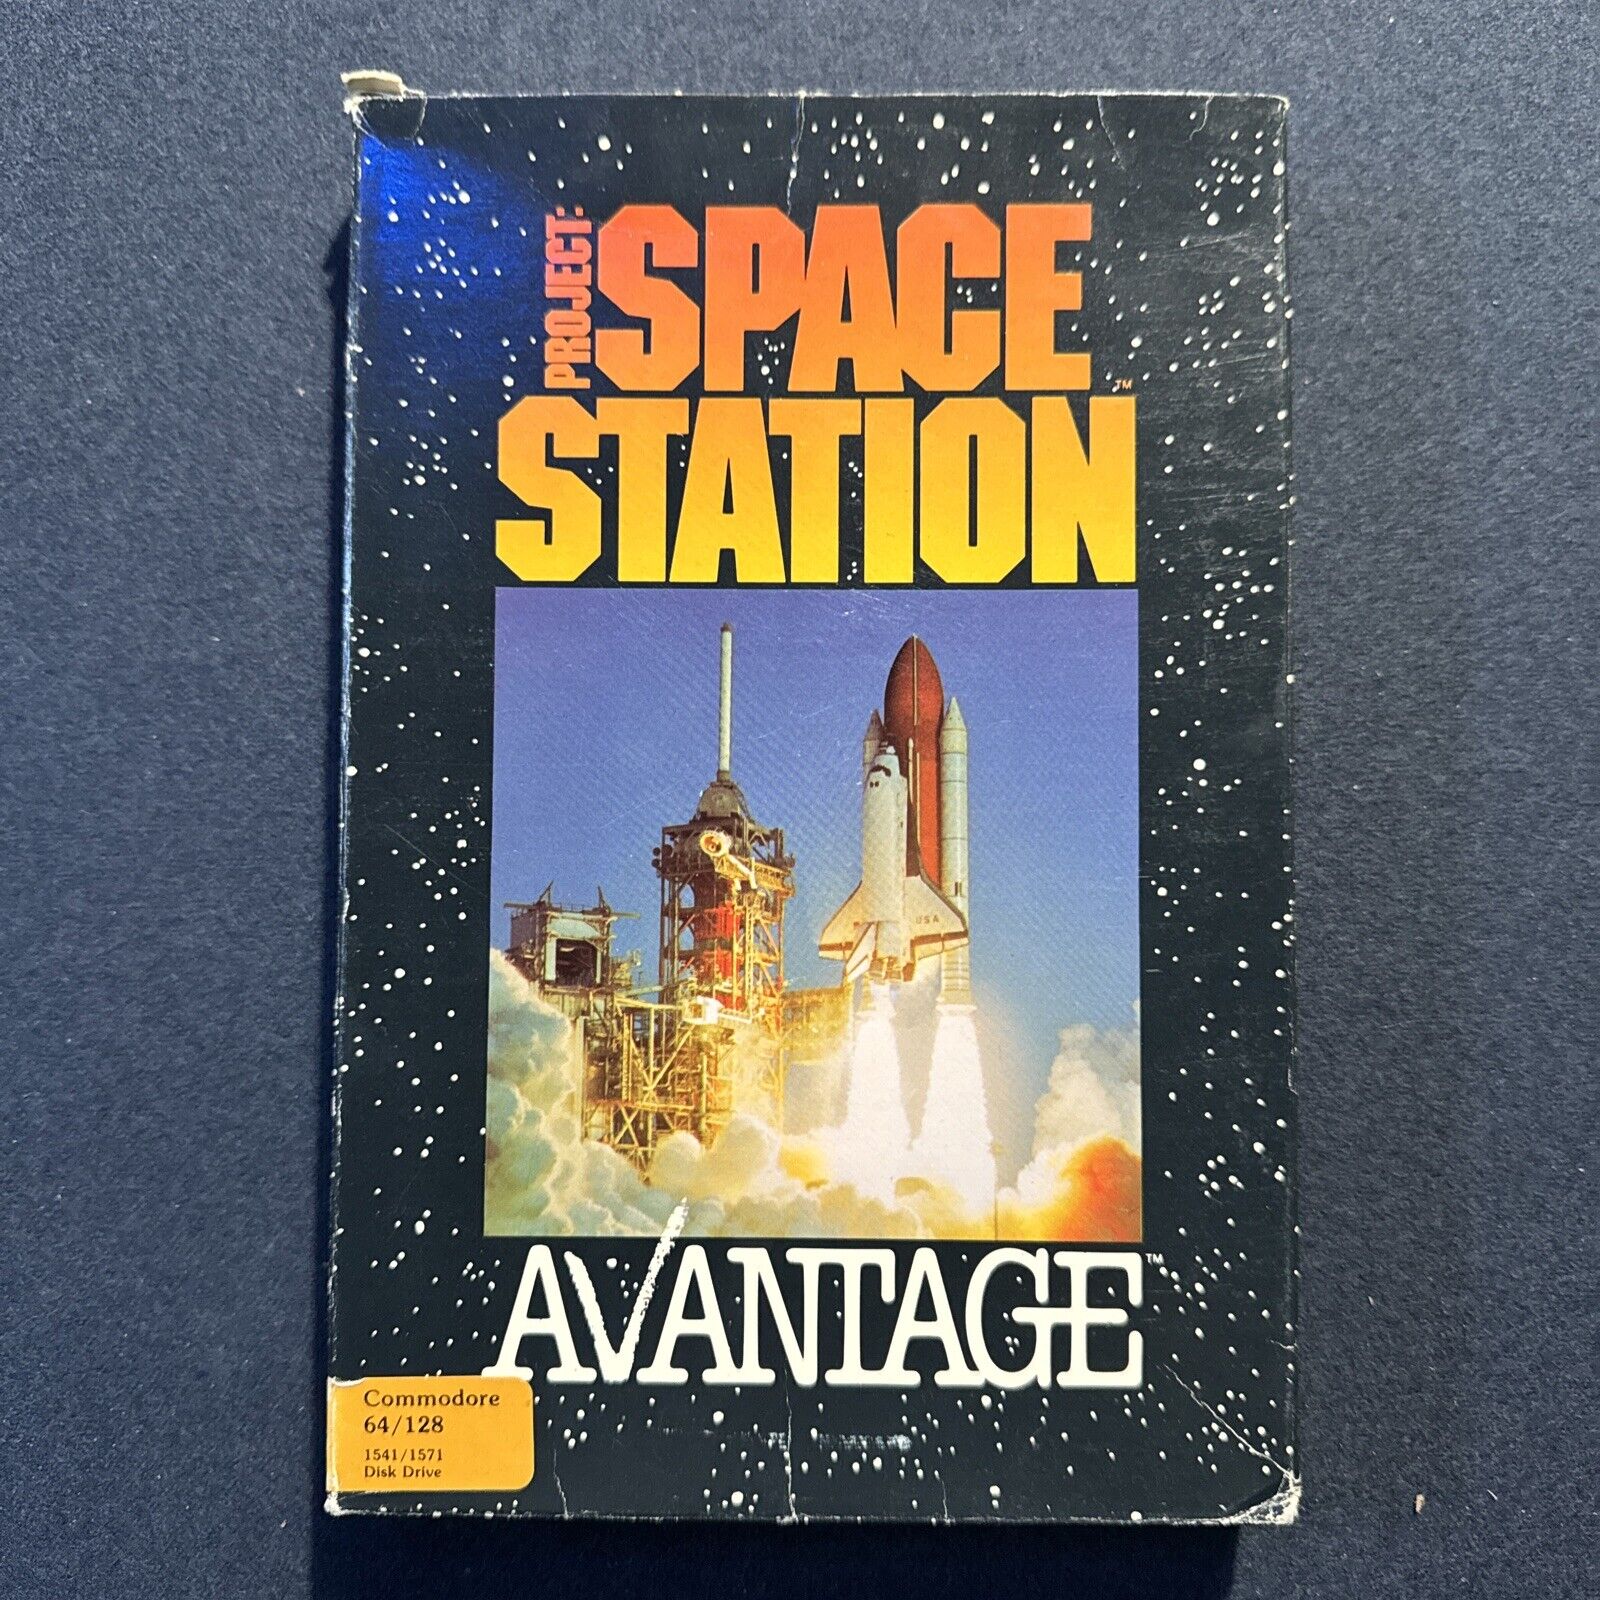 COMMODORE 64/128 -- PROJECT SPACE STATION (AVANTAGE - DISK - U.S. VERSION)